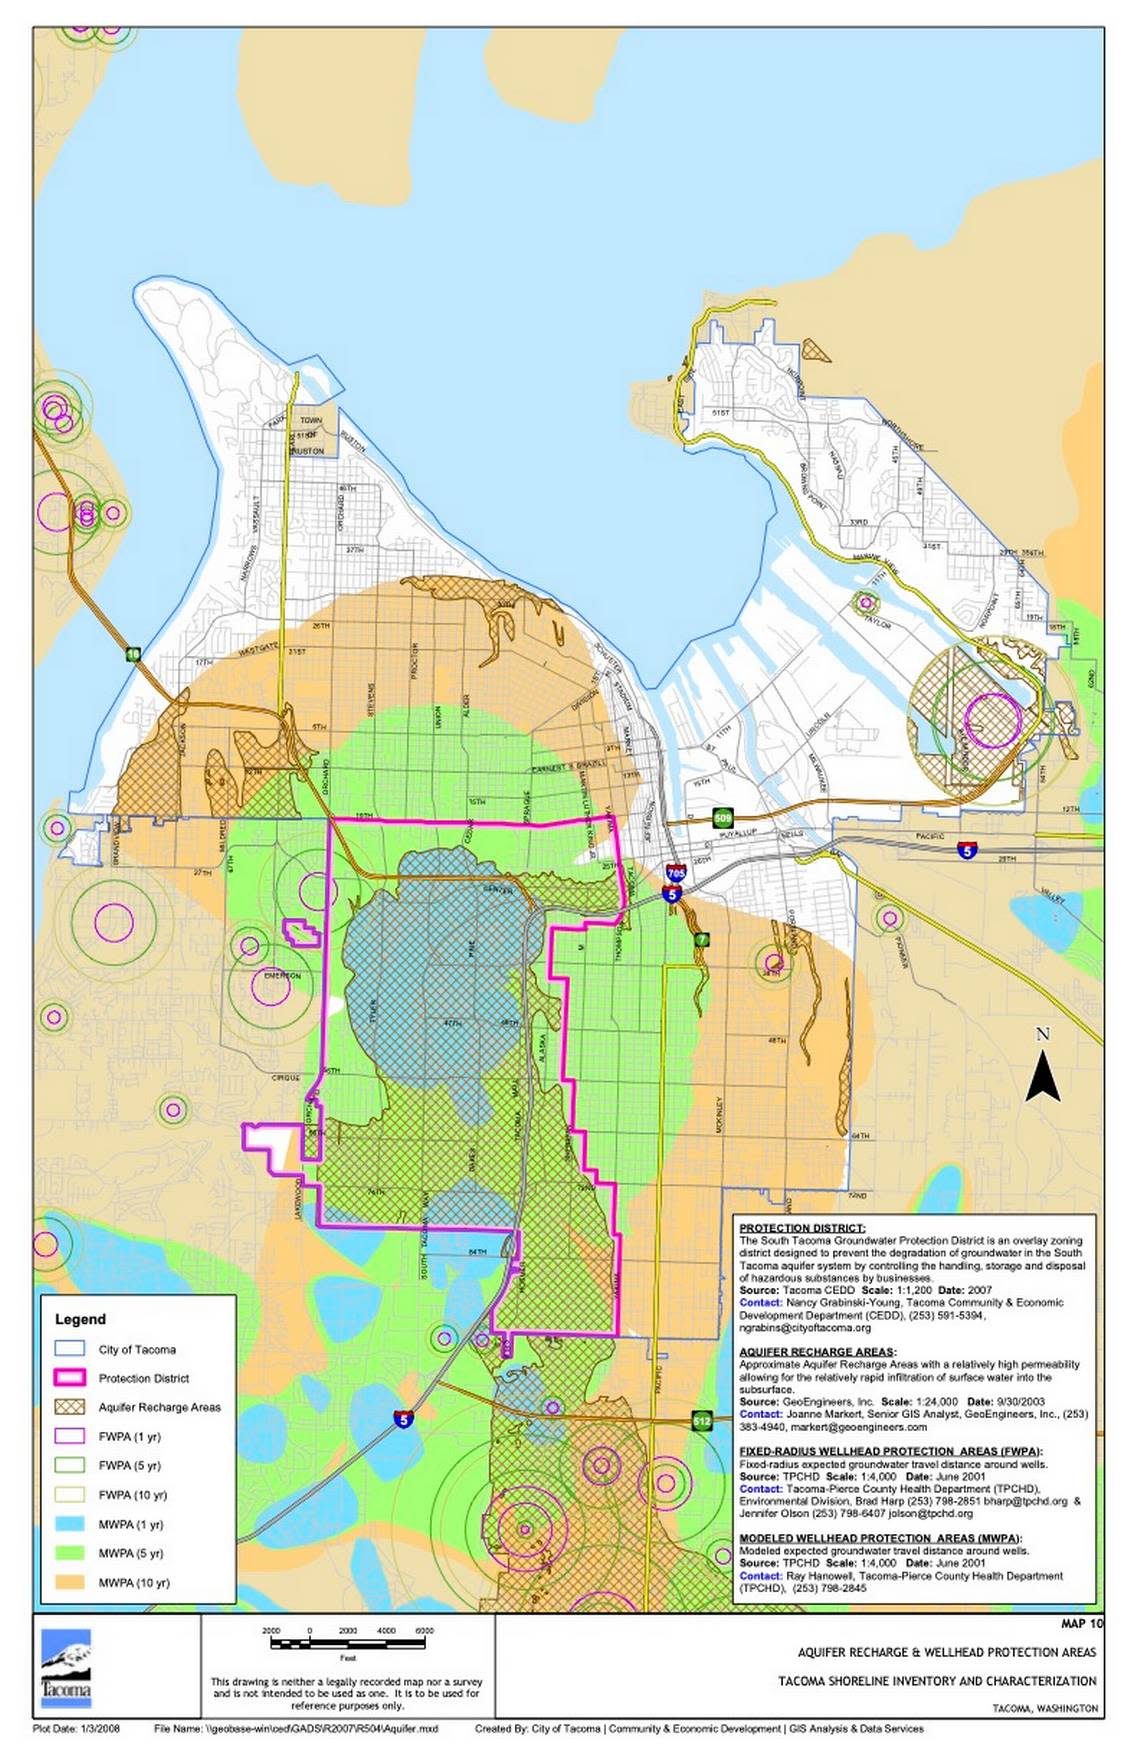 The South Tacoma Aquifer Groundwater Protection District, an overlay zoning district to prevent the degradation of groundwater in South Tacoma.